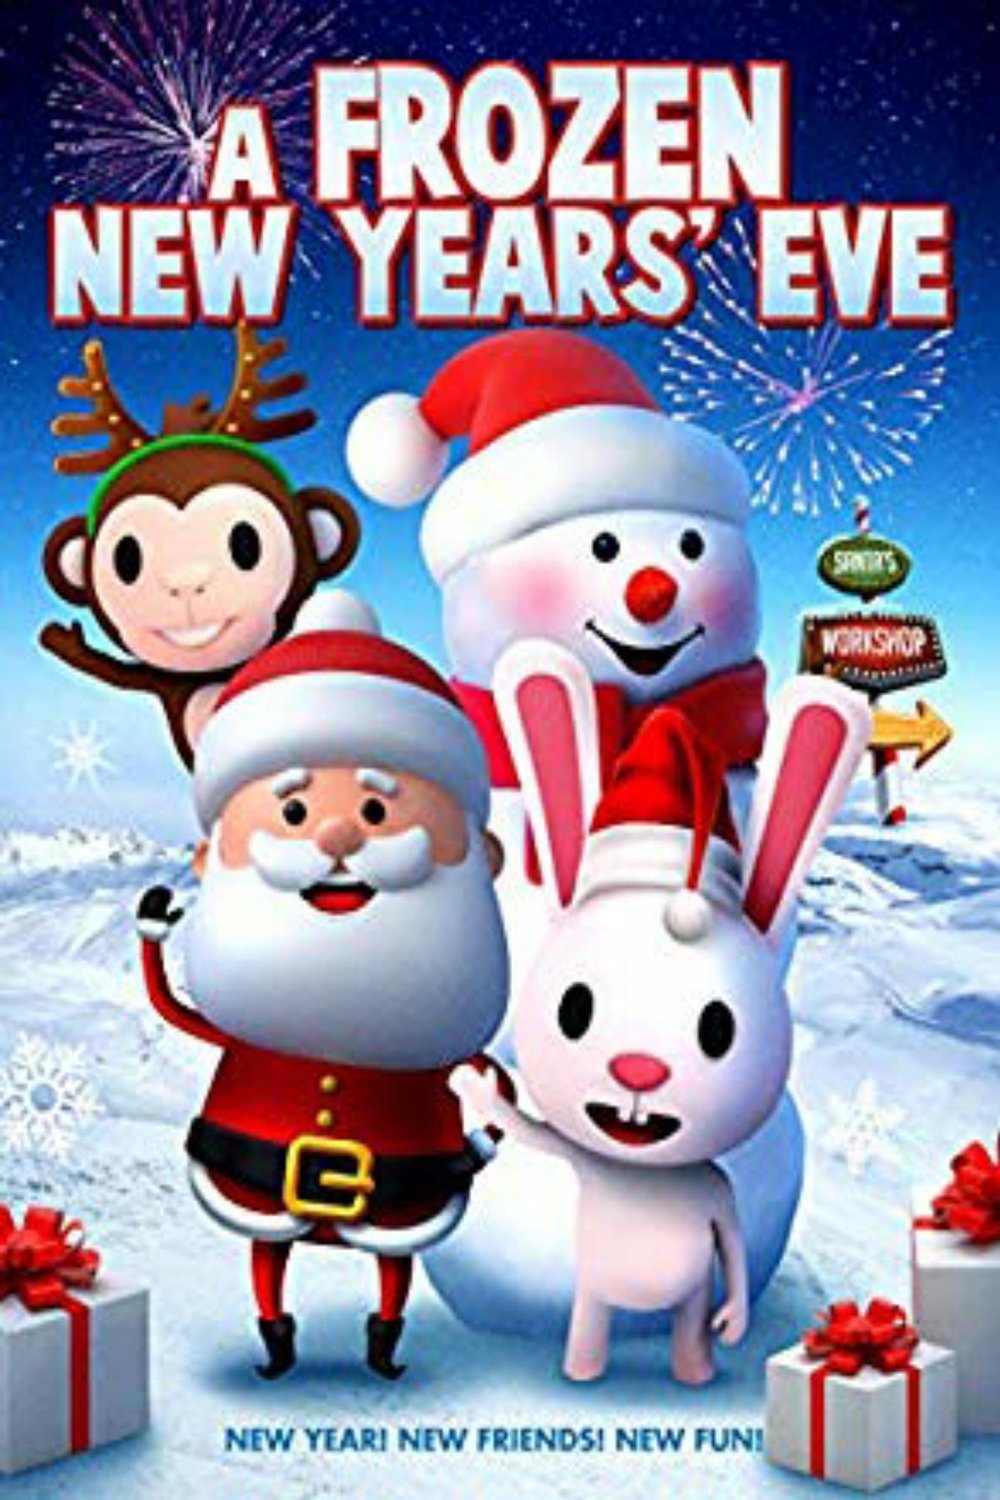 Poster of the movie A Frozen New Year's Eve